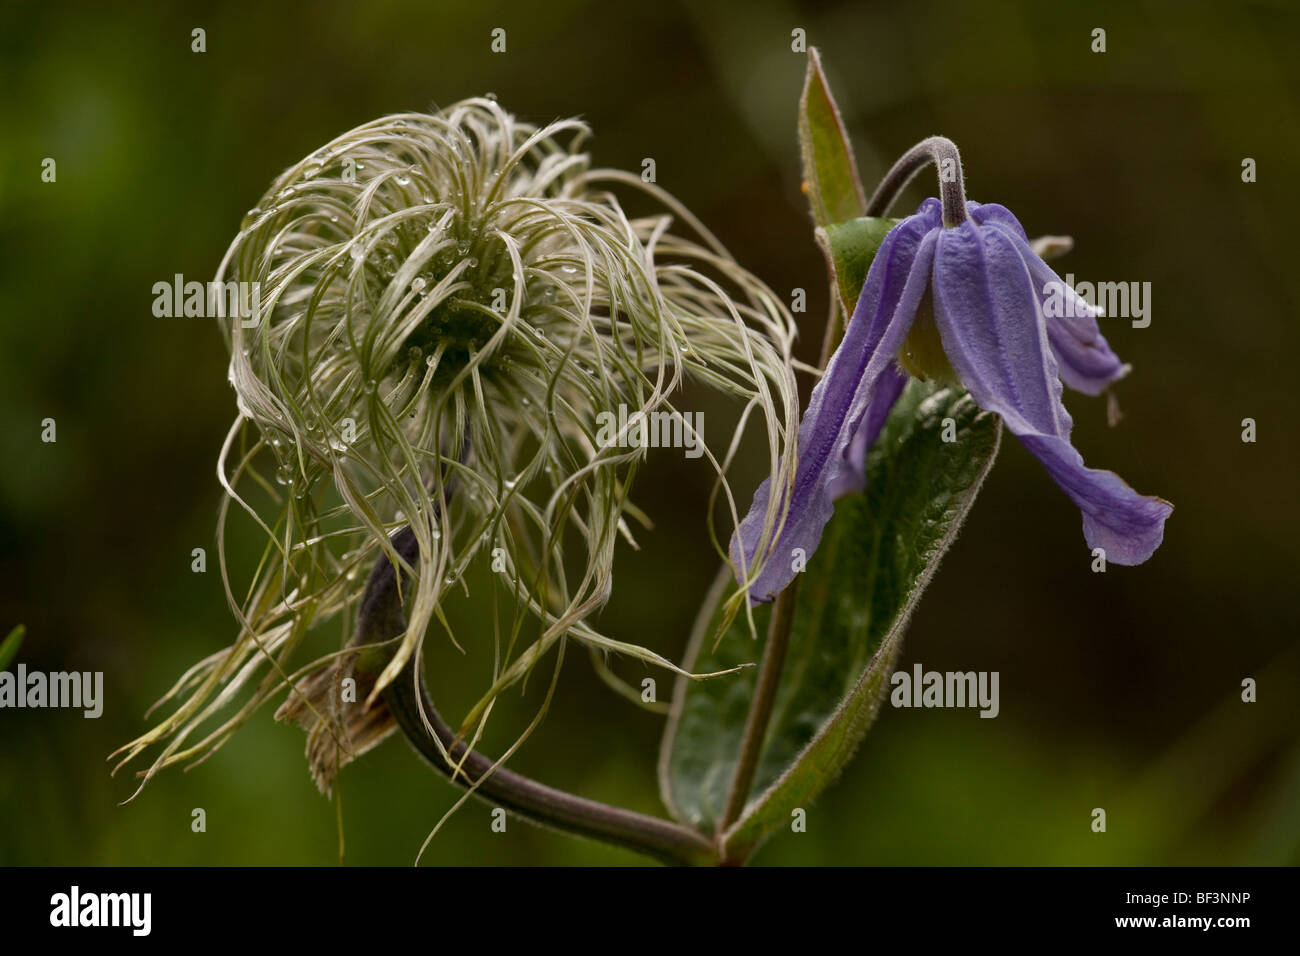 Clematis integrifolia in flower and fruit Stock Photo